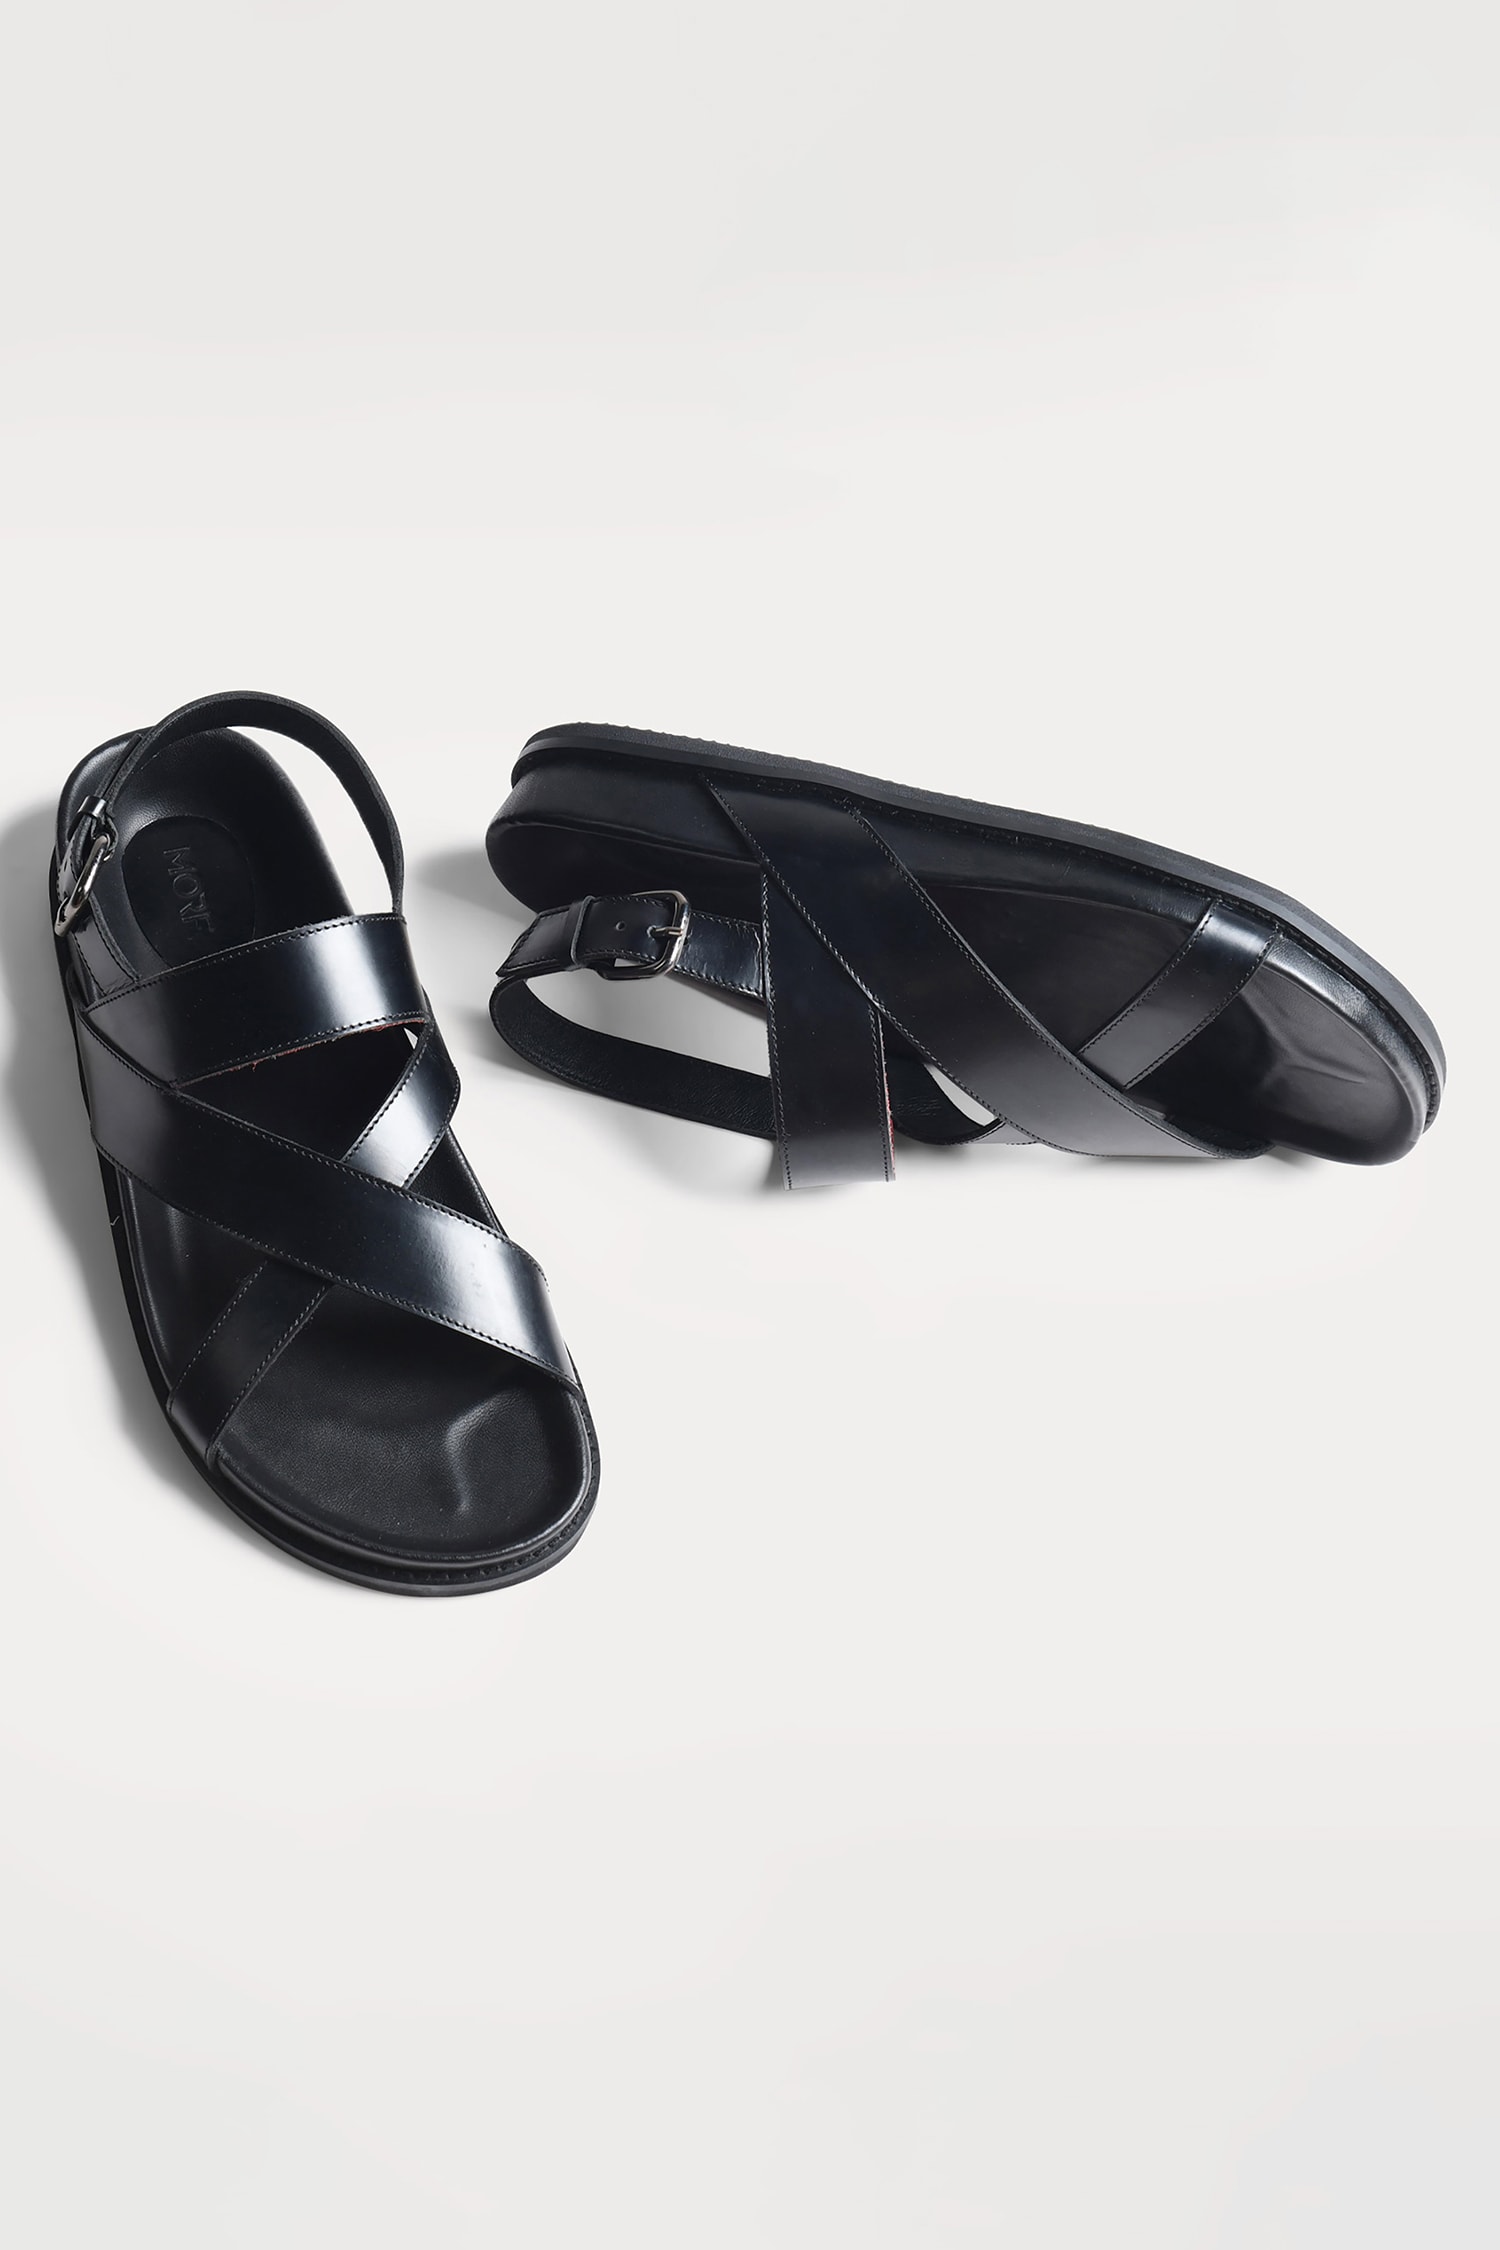 Men Sliders Beach Home Slippers Sandals Soft Wear-Resisting Man PU Slipper  - China Leather Man Sandals and Used Sandals for Men price |  Made-in-China.com